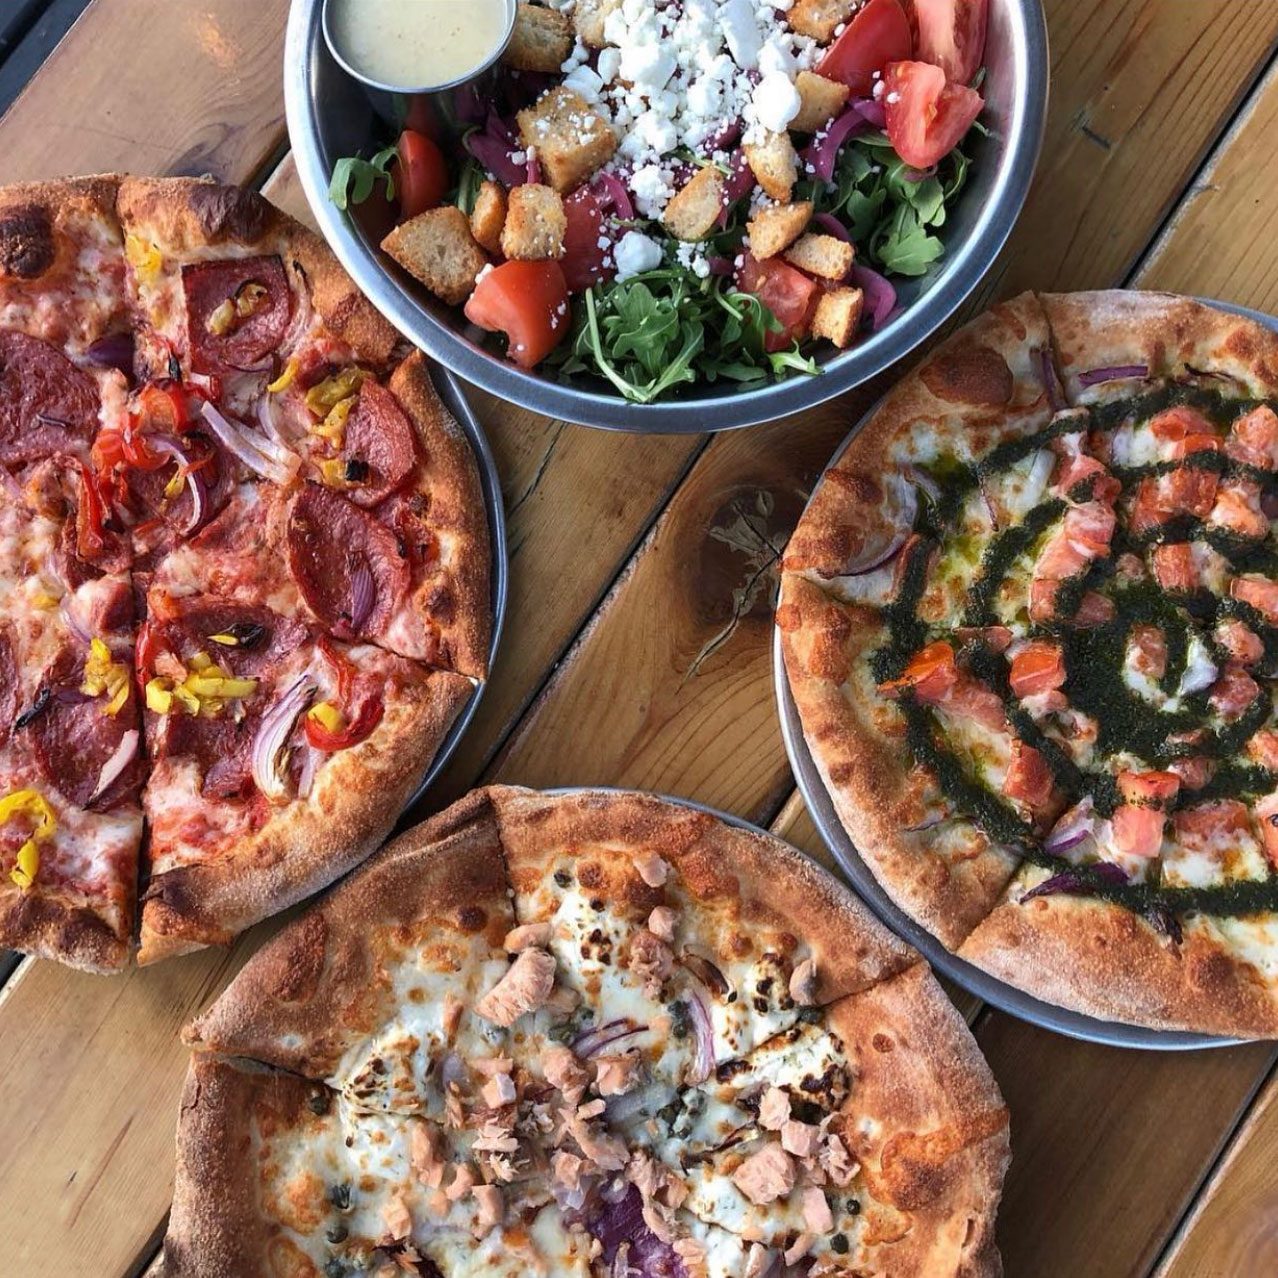 three pizzas and a salad, view from above